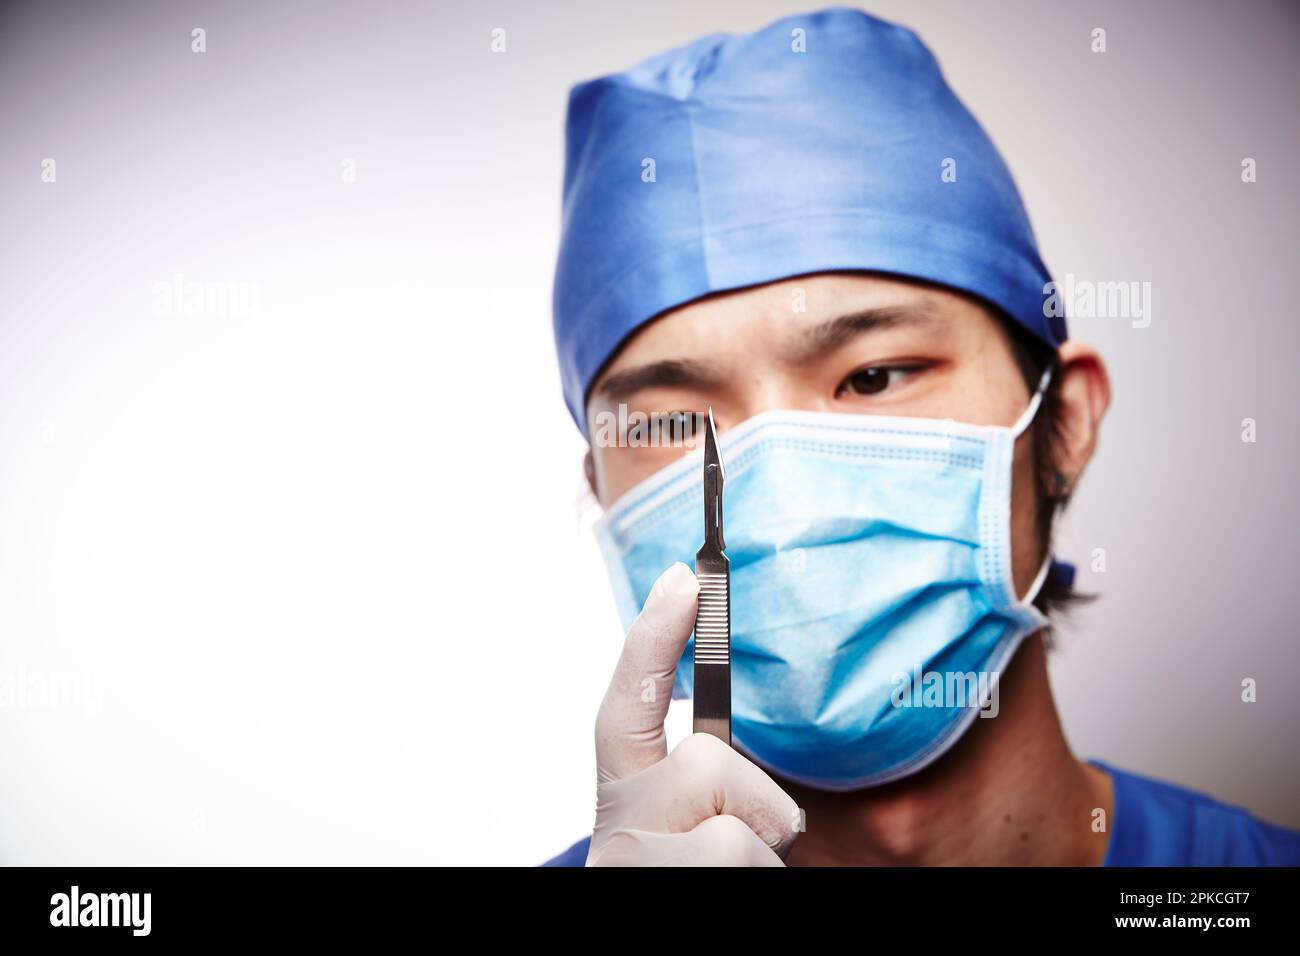 Male doctor wearing surgical gown holding scalpel Stock Photo